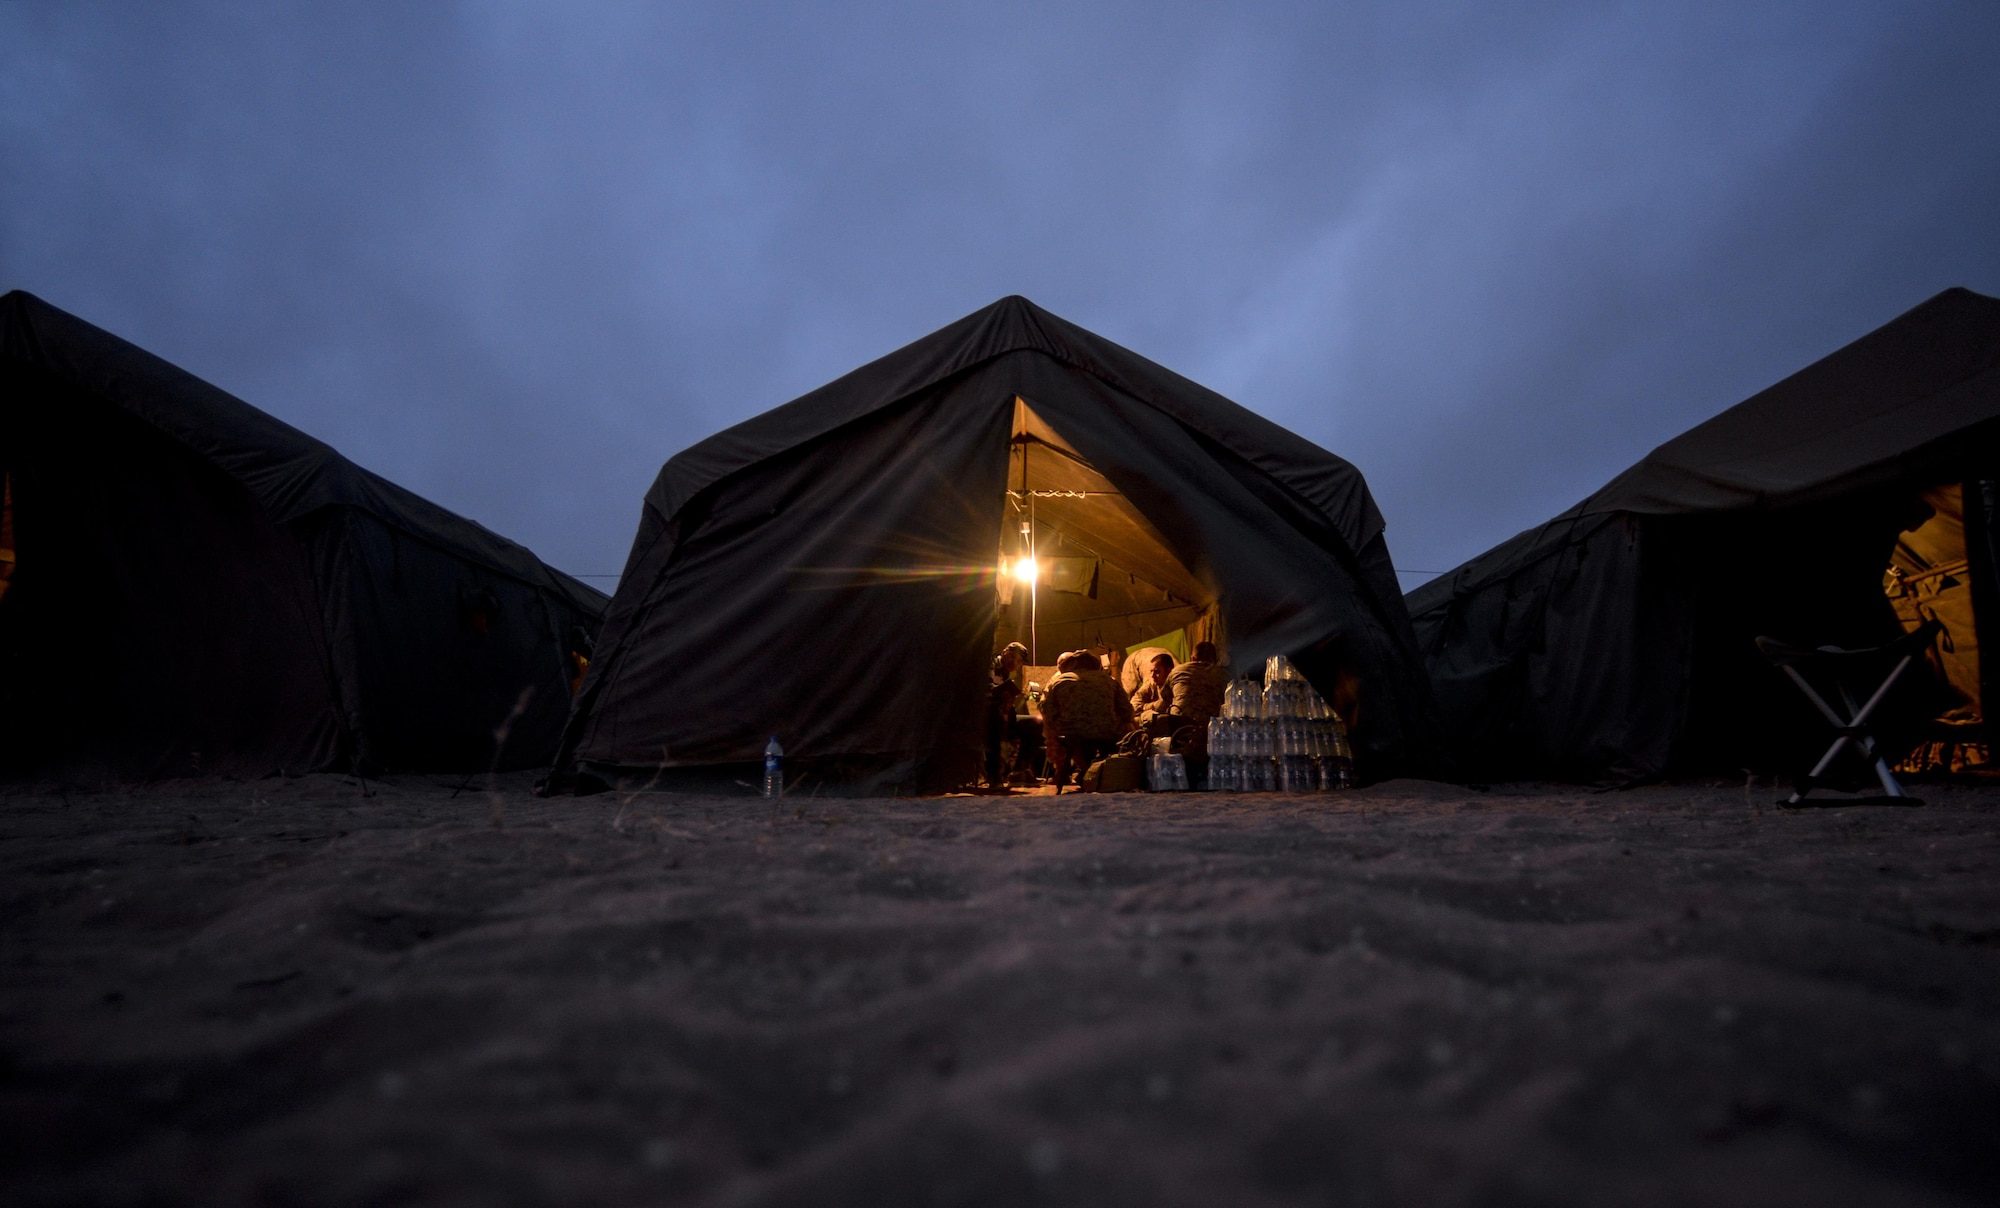 Military members participating in AFRICAN LION 16 gather inside of their tents at the end of the day at Tifnit, Kingdom of Morocco, April 23, 2016. Of the 11 nations participating in the annual exercise, a group of U.S. military members, Royal Moroccan armed forces members, Spanish Legion soldiers and Royal Netherlands army soldiers lived in field conditions and participated in daily familiarization with other nations’ tactics to improve interoperability. (U.S. Air Force photo by Senior Airman Krystal Ardrey)